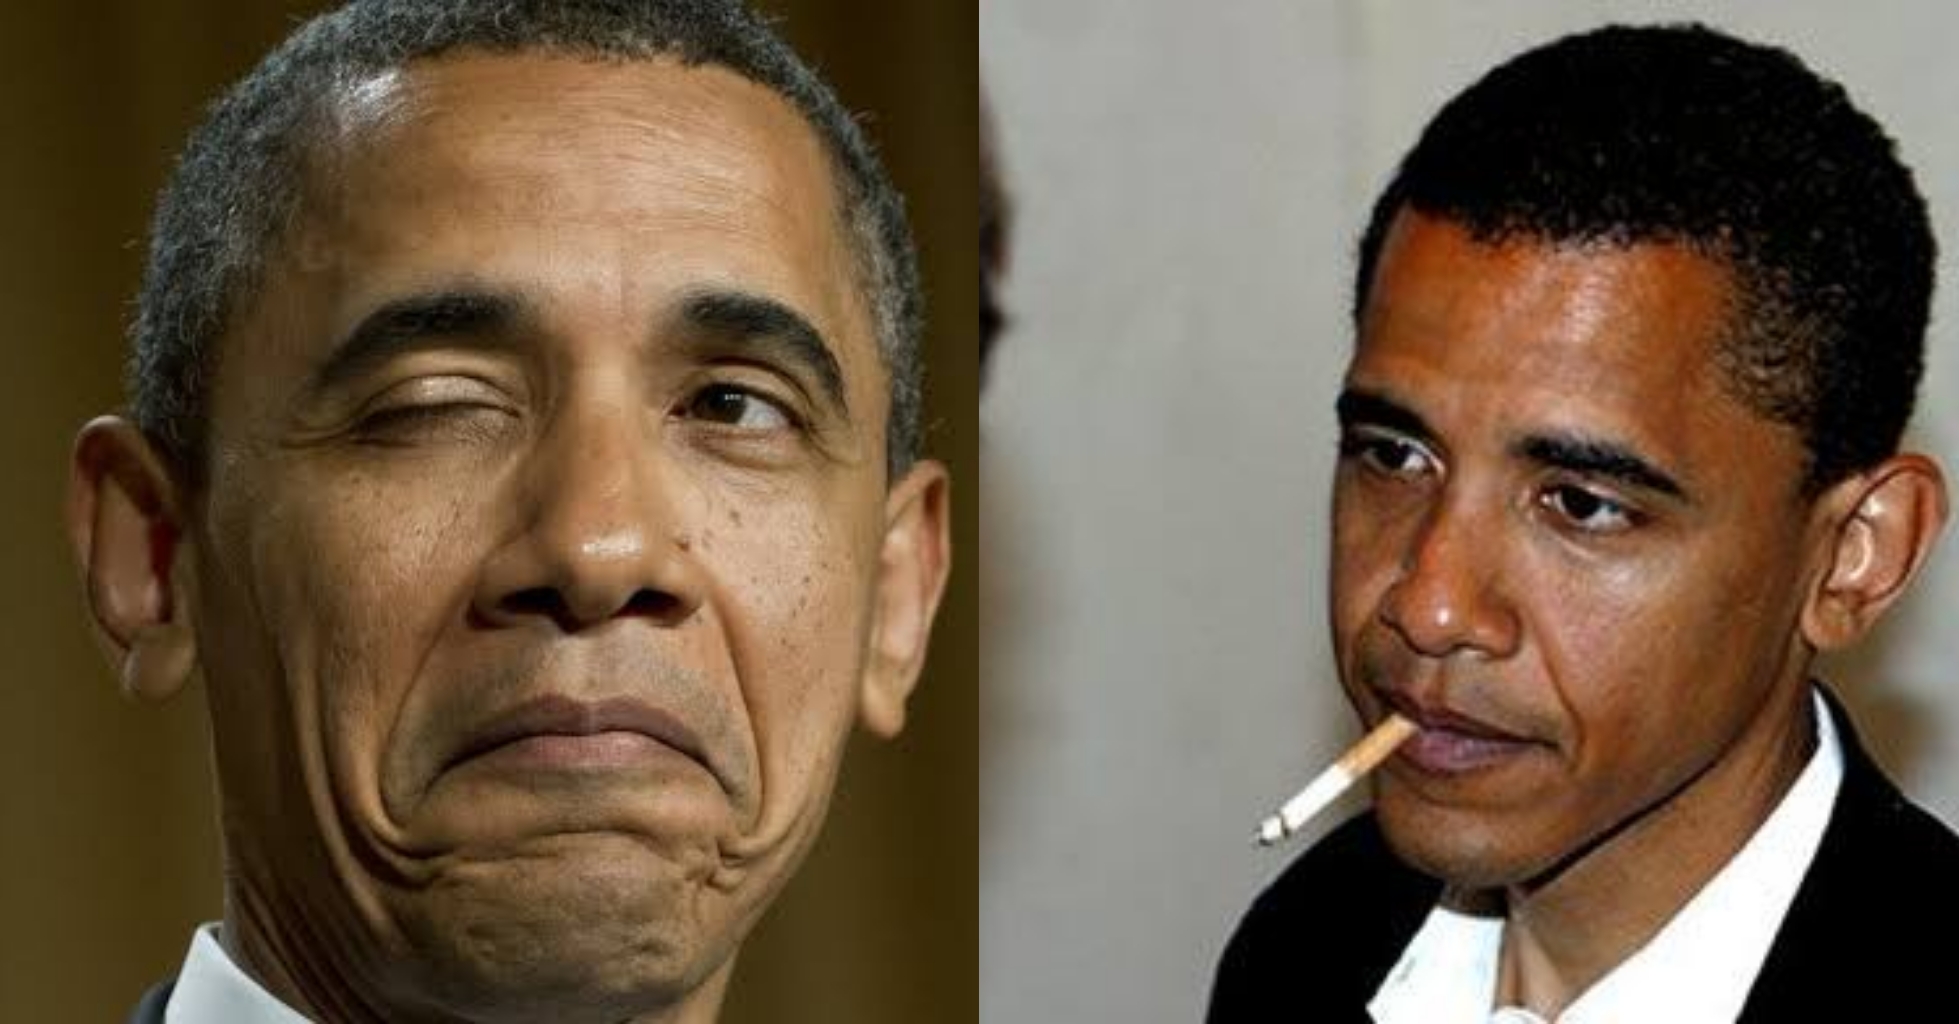 Barack Obama says he smokes 8-10 sticks of cigarettes per day while he was President